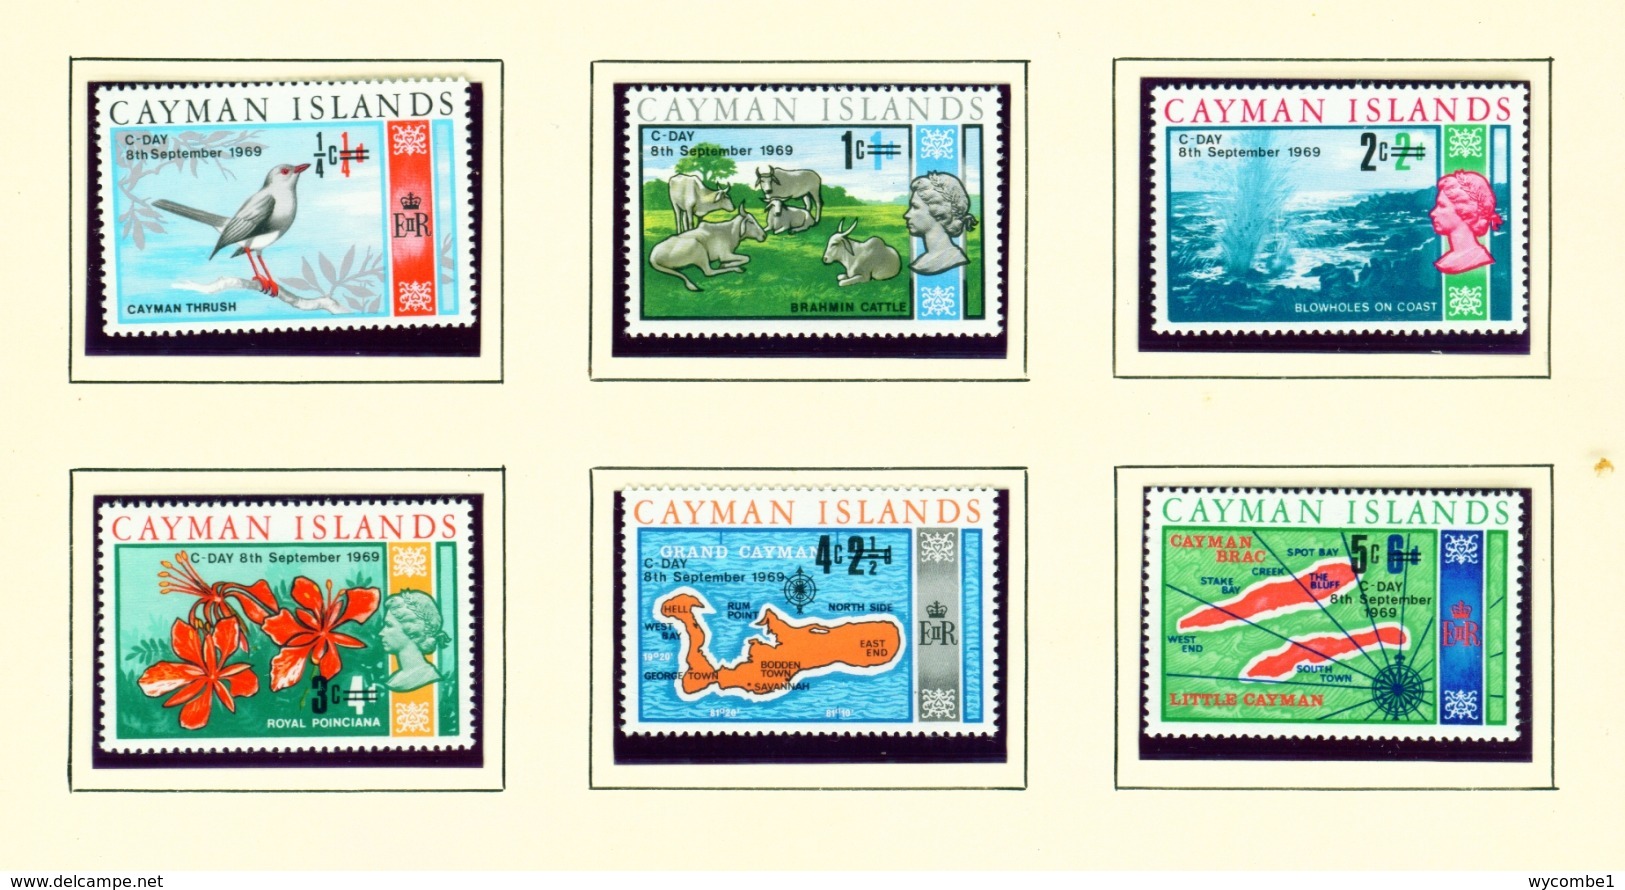 CAYMAN ISLANDS - 1969 Decimal Surcharge Definitives Set Unmounted/Never Hinged Mint - Cayman Islands